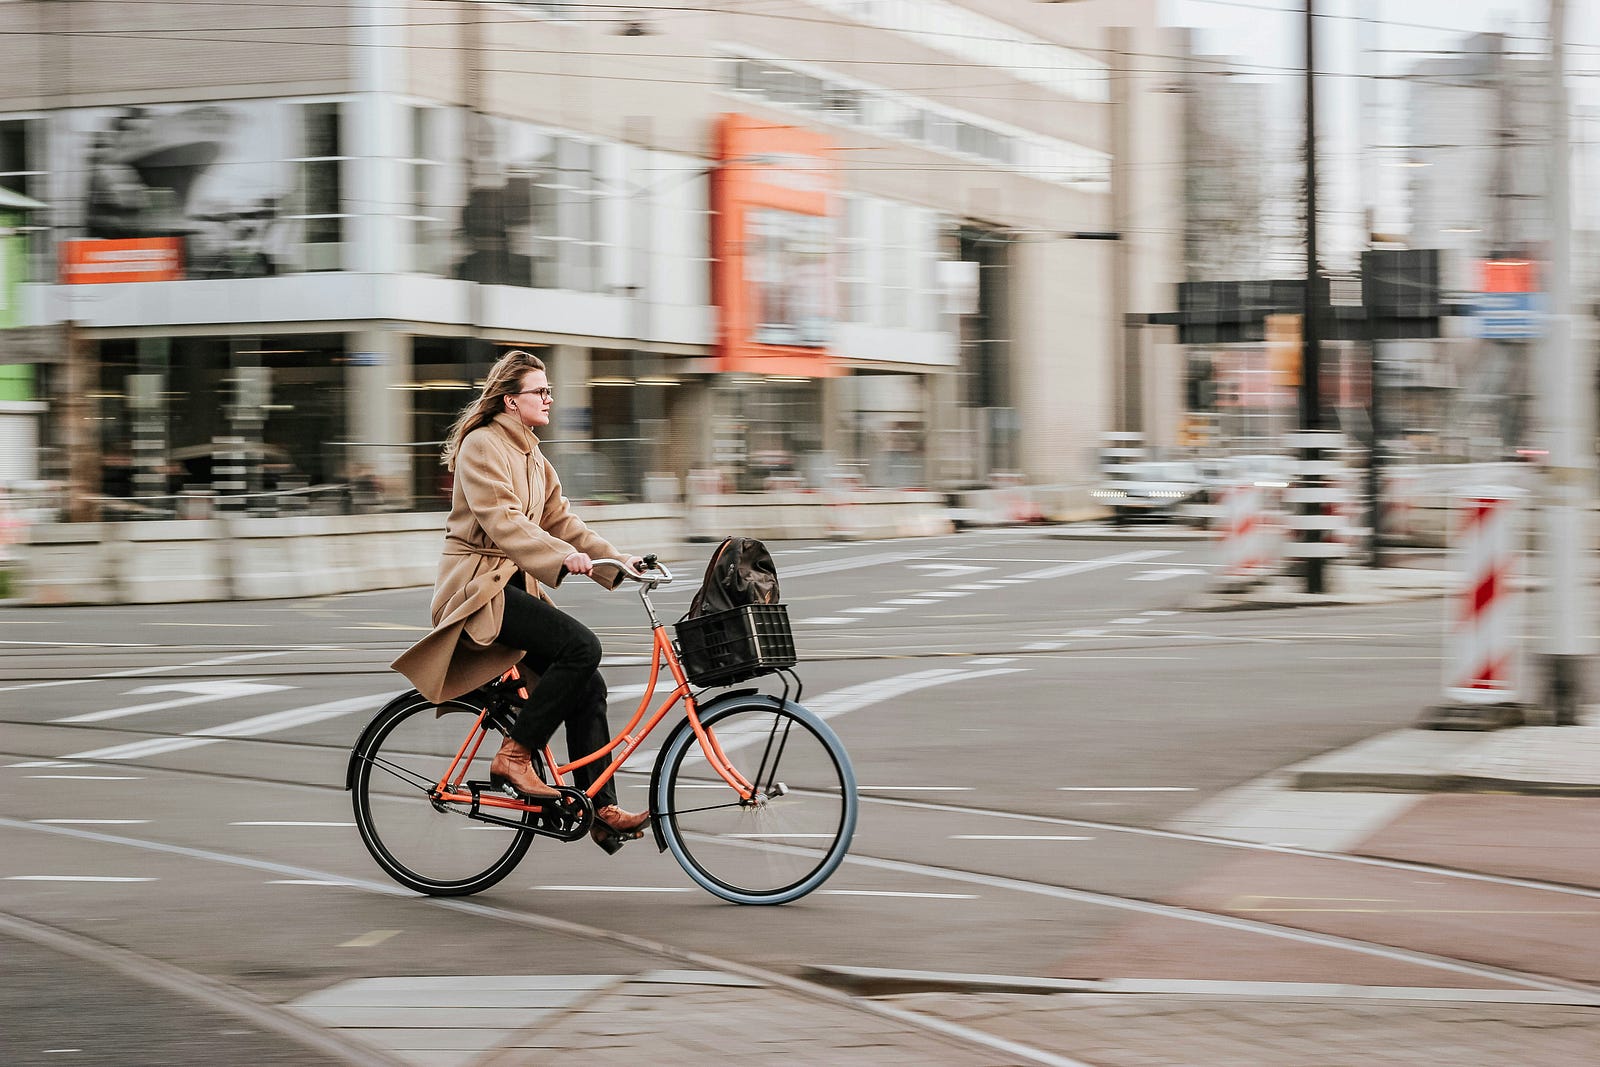 A woman rides a simple orange bicycle in the city.